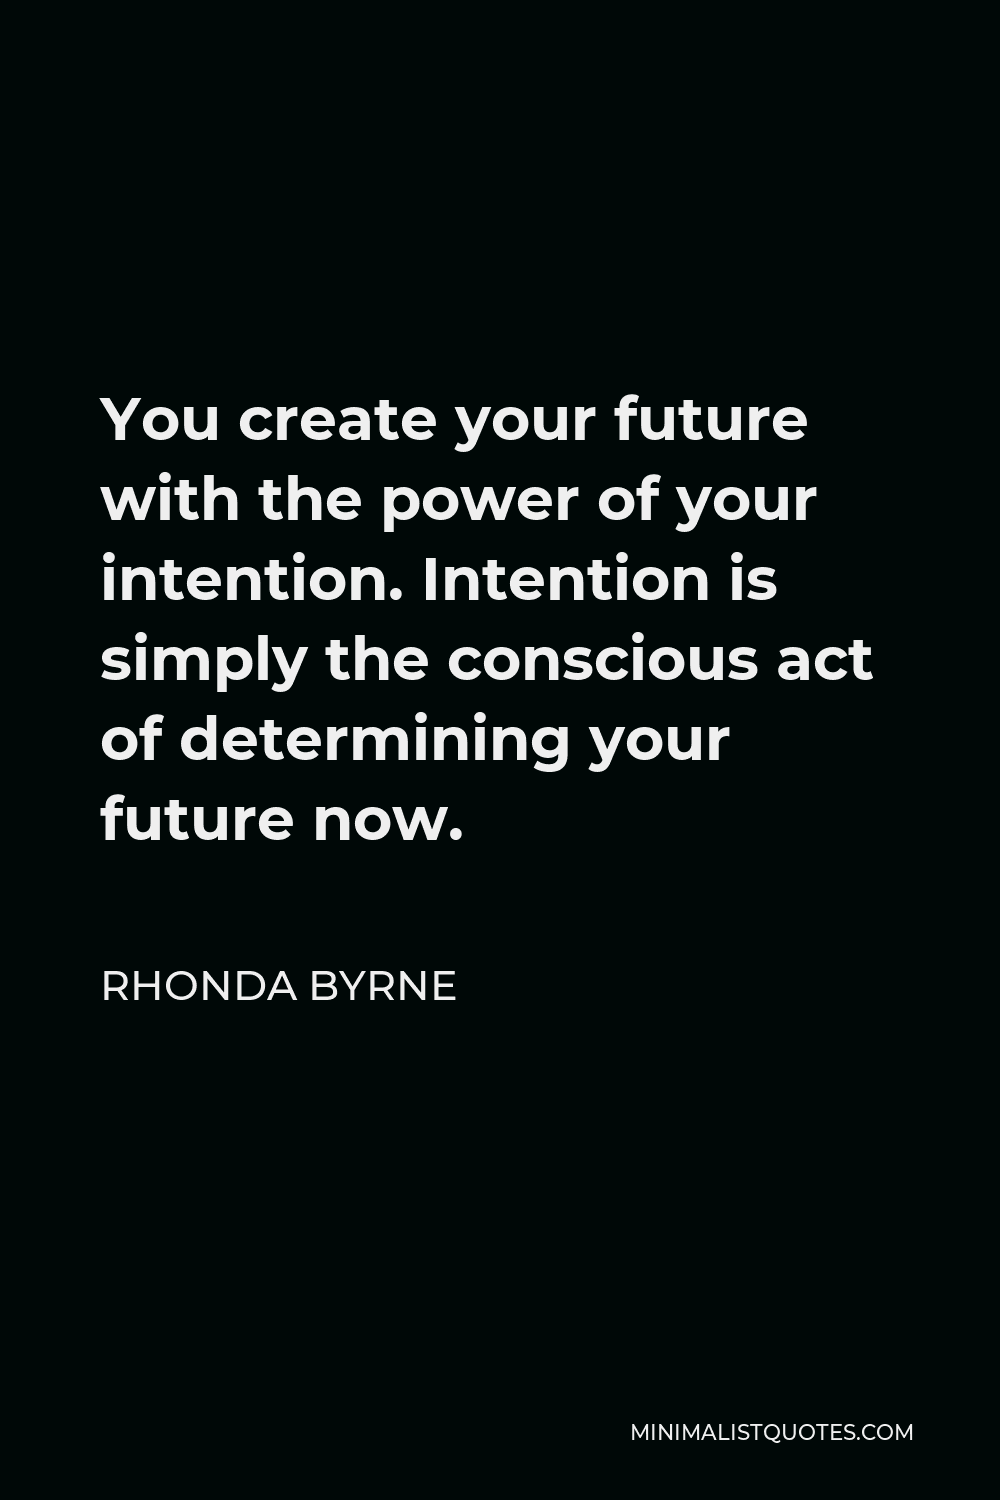 Rhonda Byrne Quote - You create your future with the power of your intention. Intention is simply the conscious act of determining your future now.